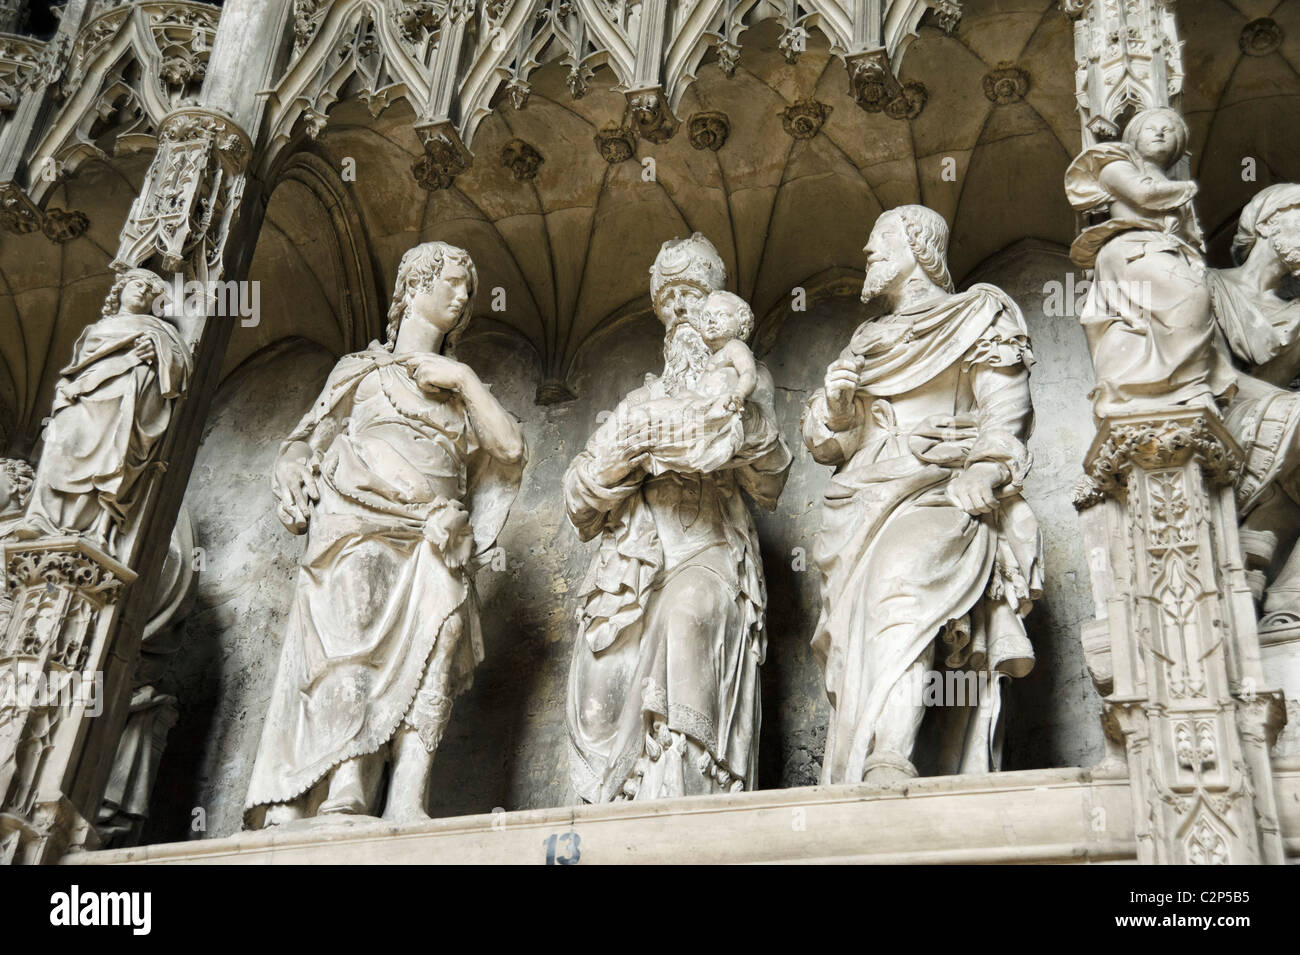 Details of figures on the Choir Screen in the interior of the Cathedral of Notre Dame, Chartres, France Stock Photo